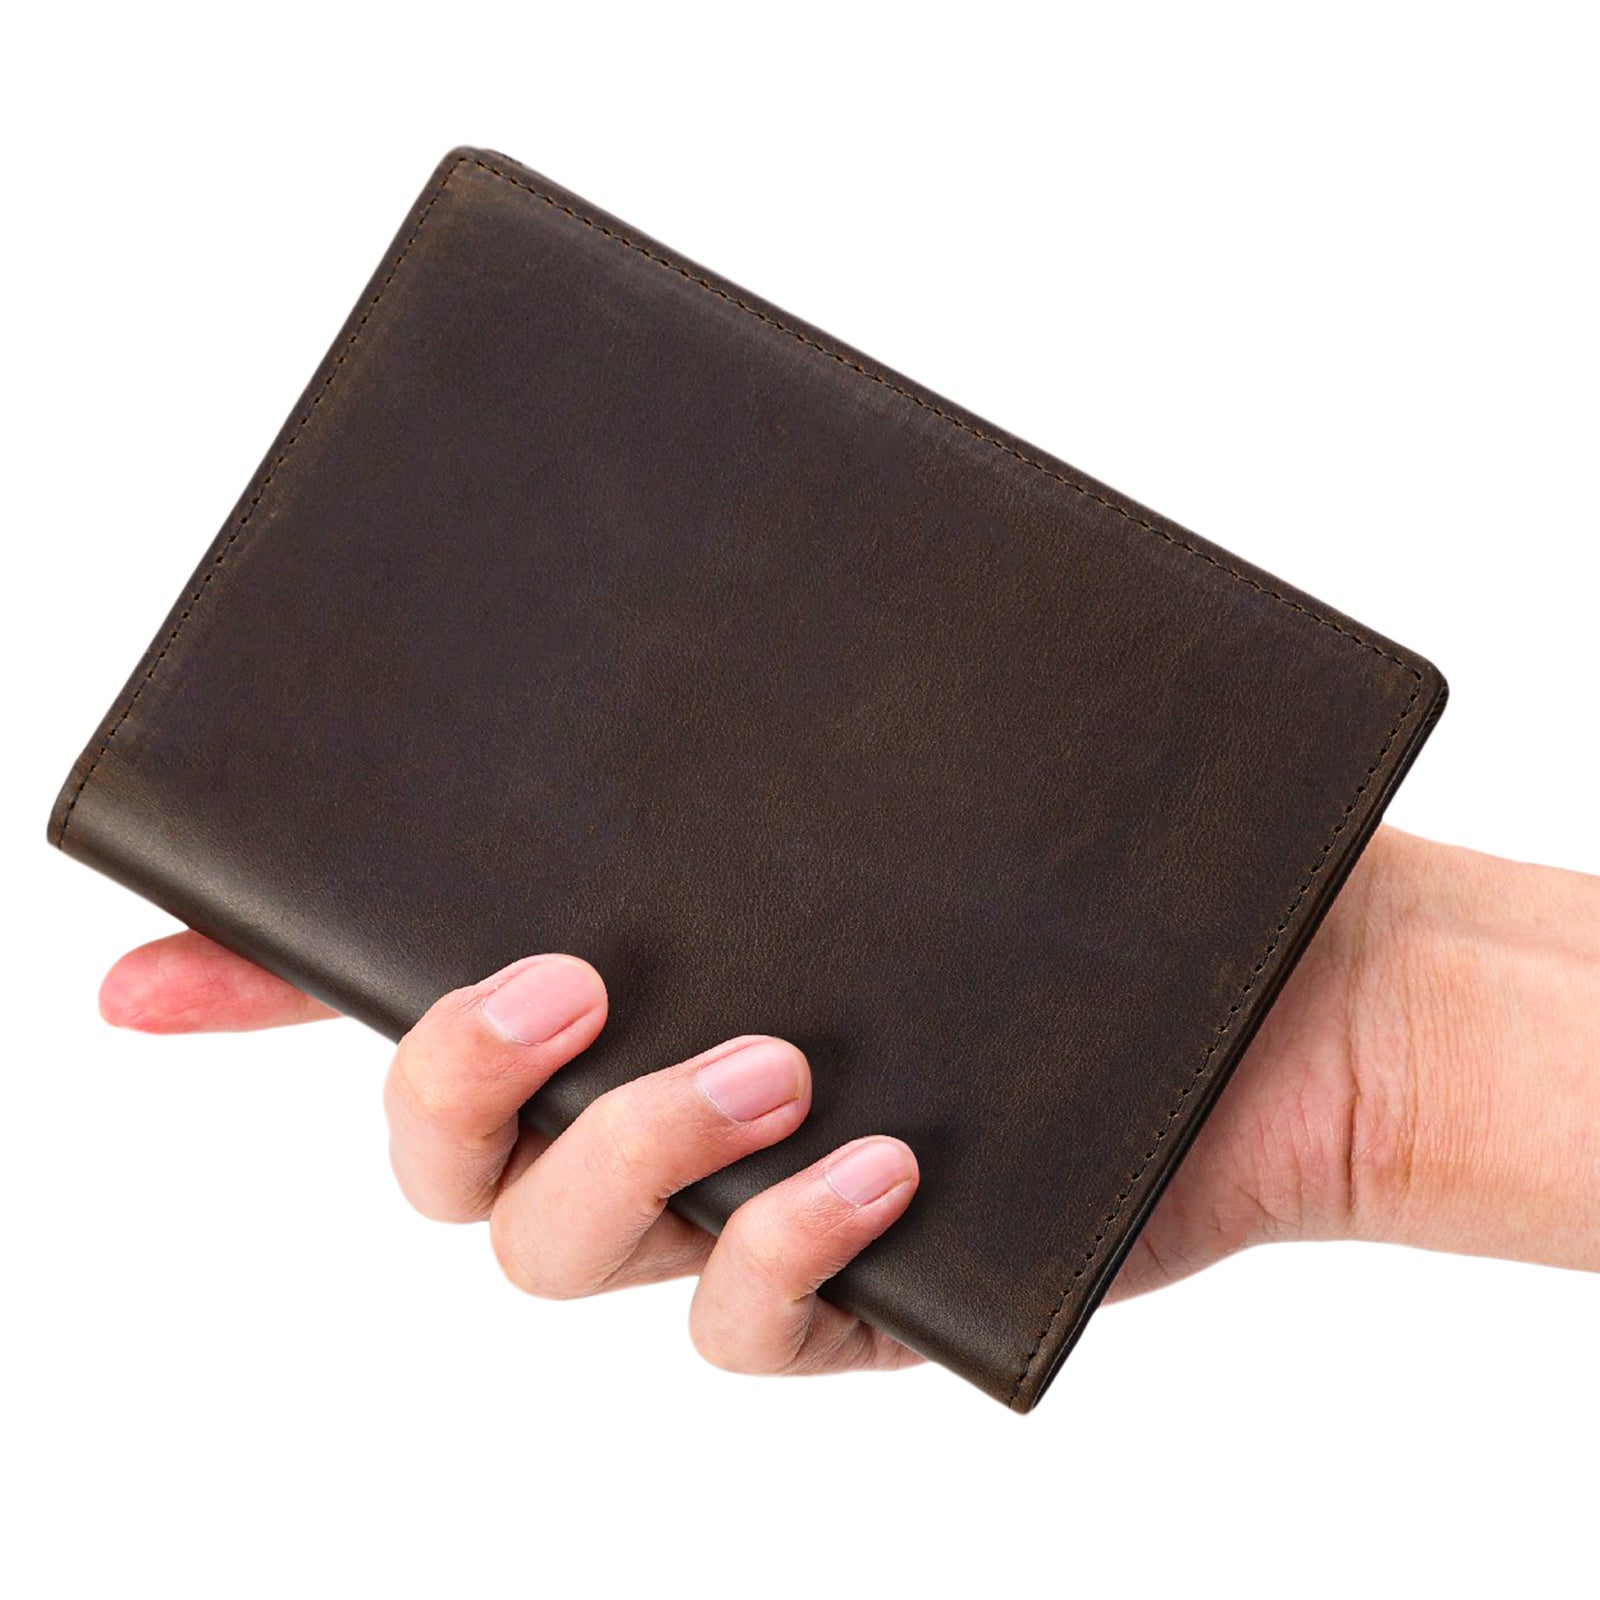 Polare Leather Tri-fold Wallet for Men - Full Grain Leather Extra Capa